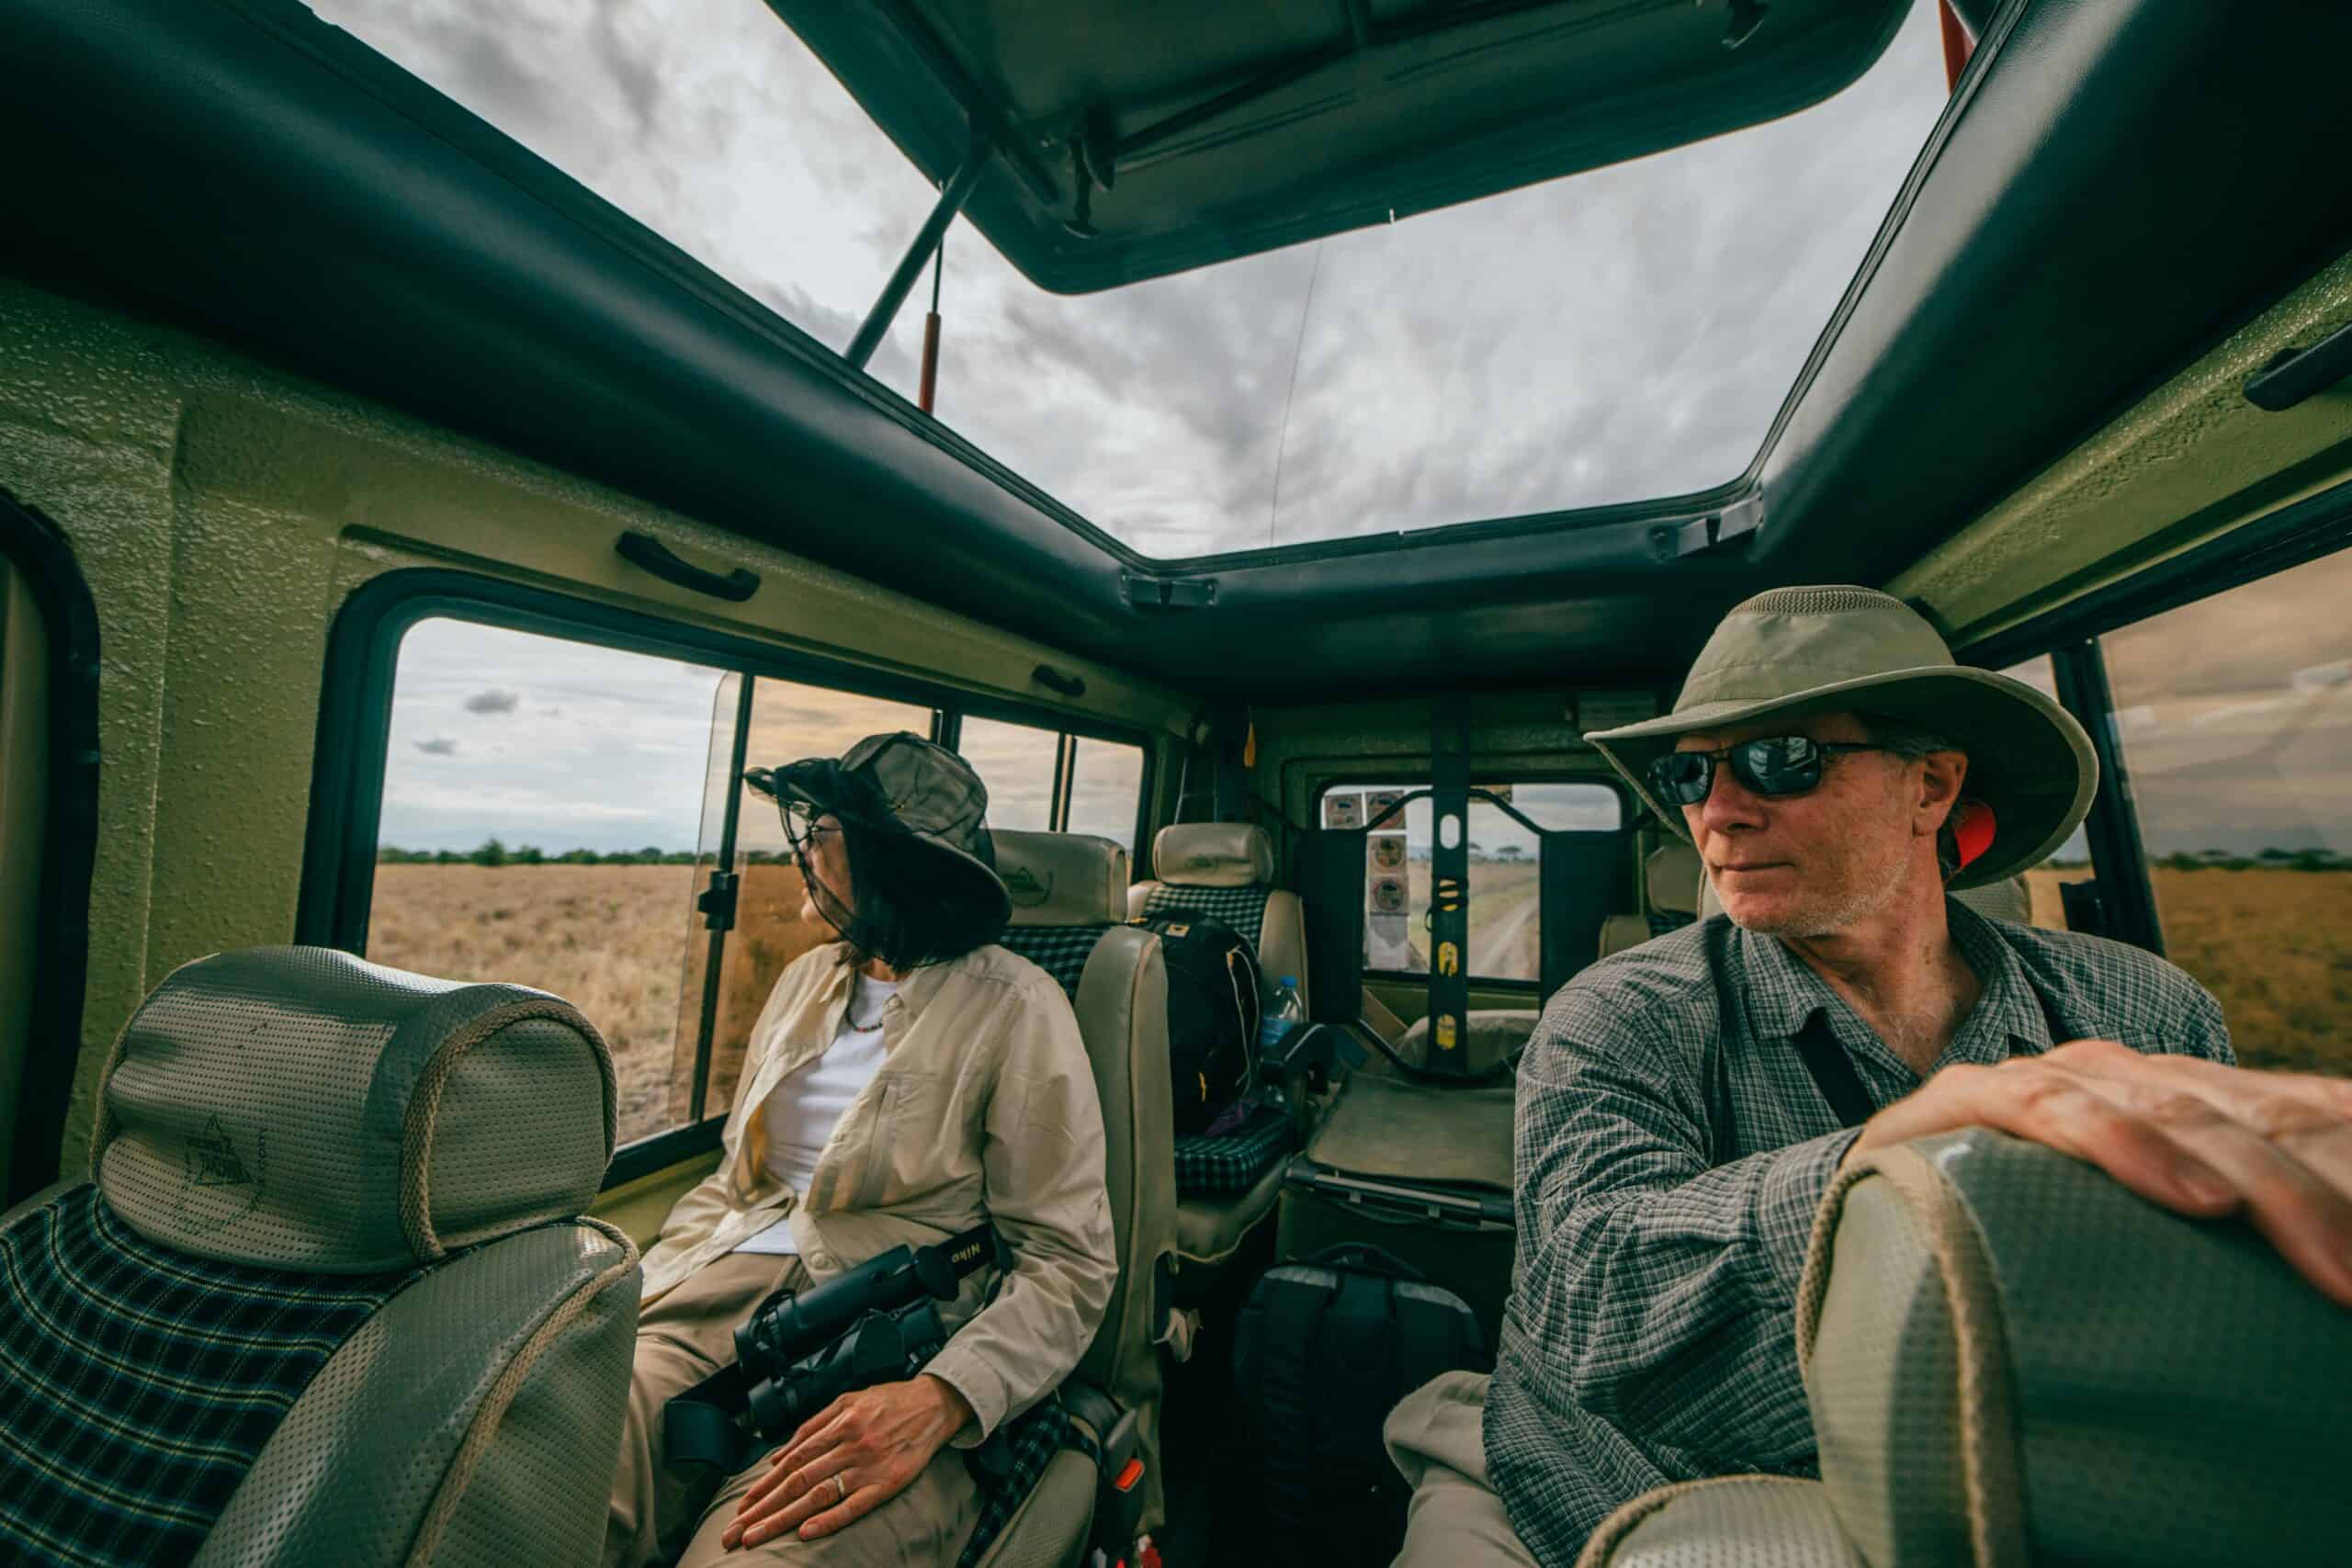 Inside a Safari Vehicle during a Game Drive